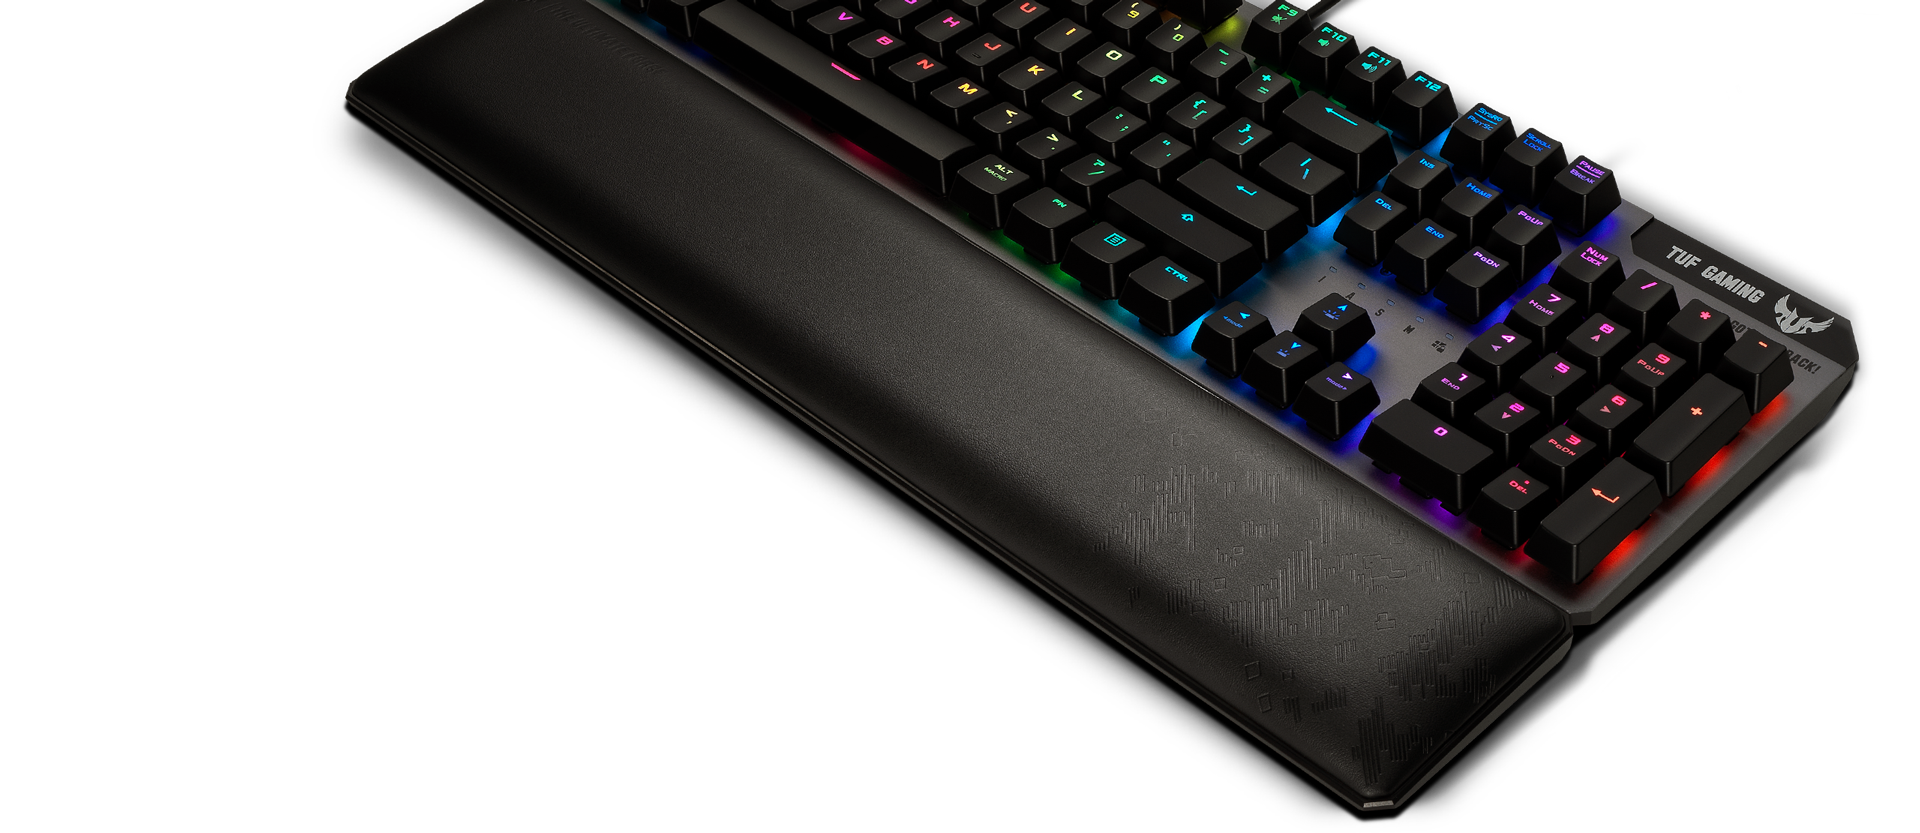 ASUS TUF Gaming K7 is designed to ensure that every key is within the user’s easy reach